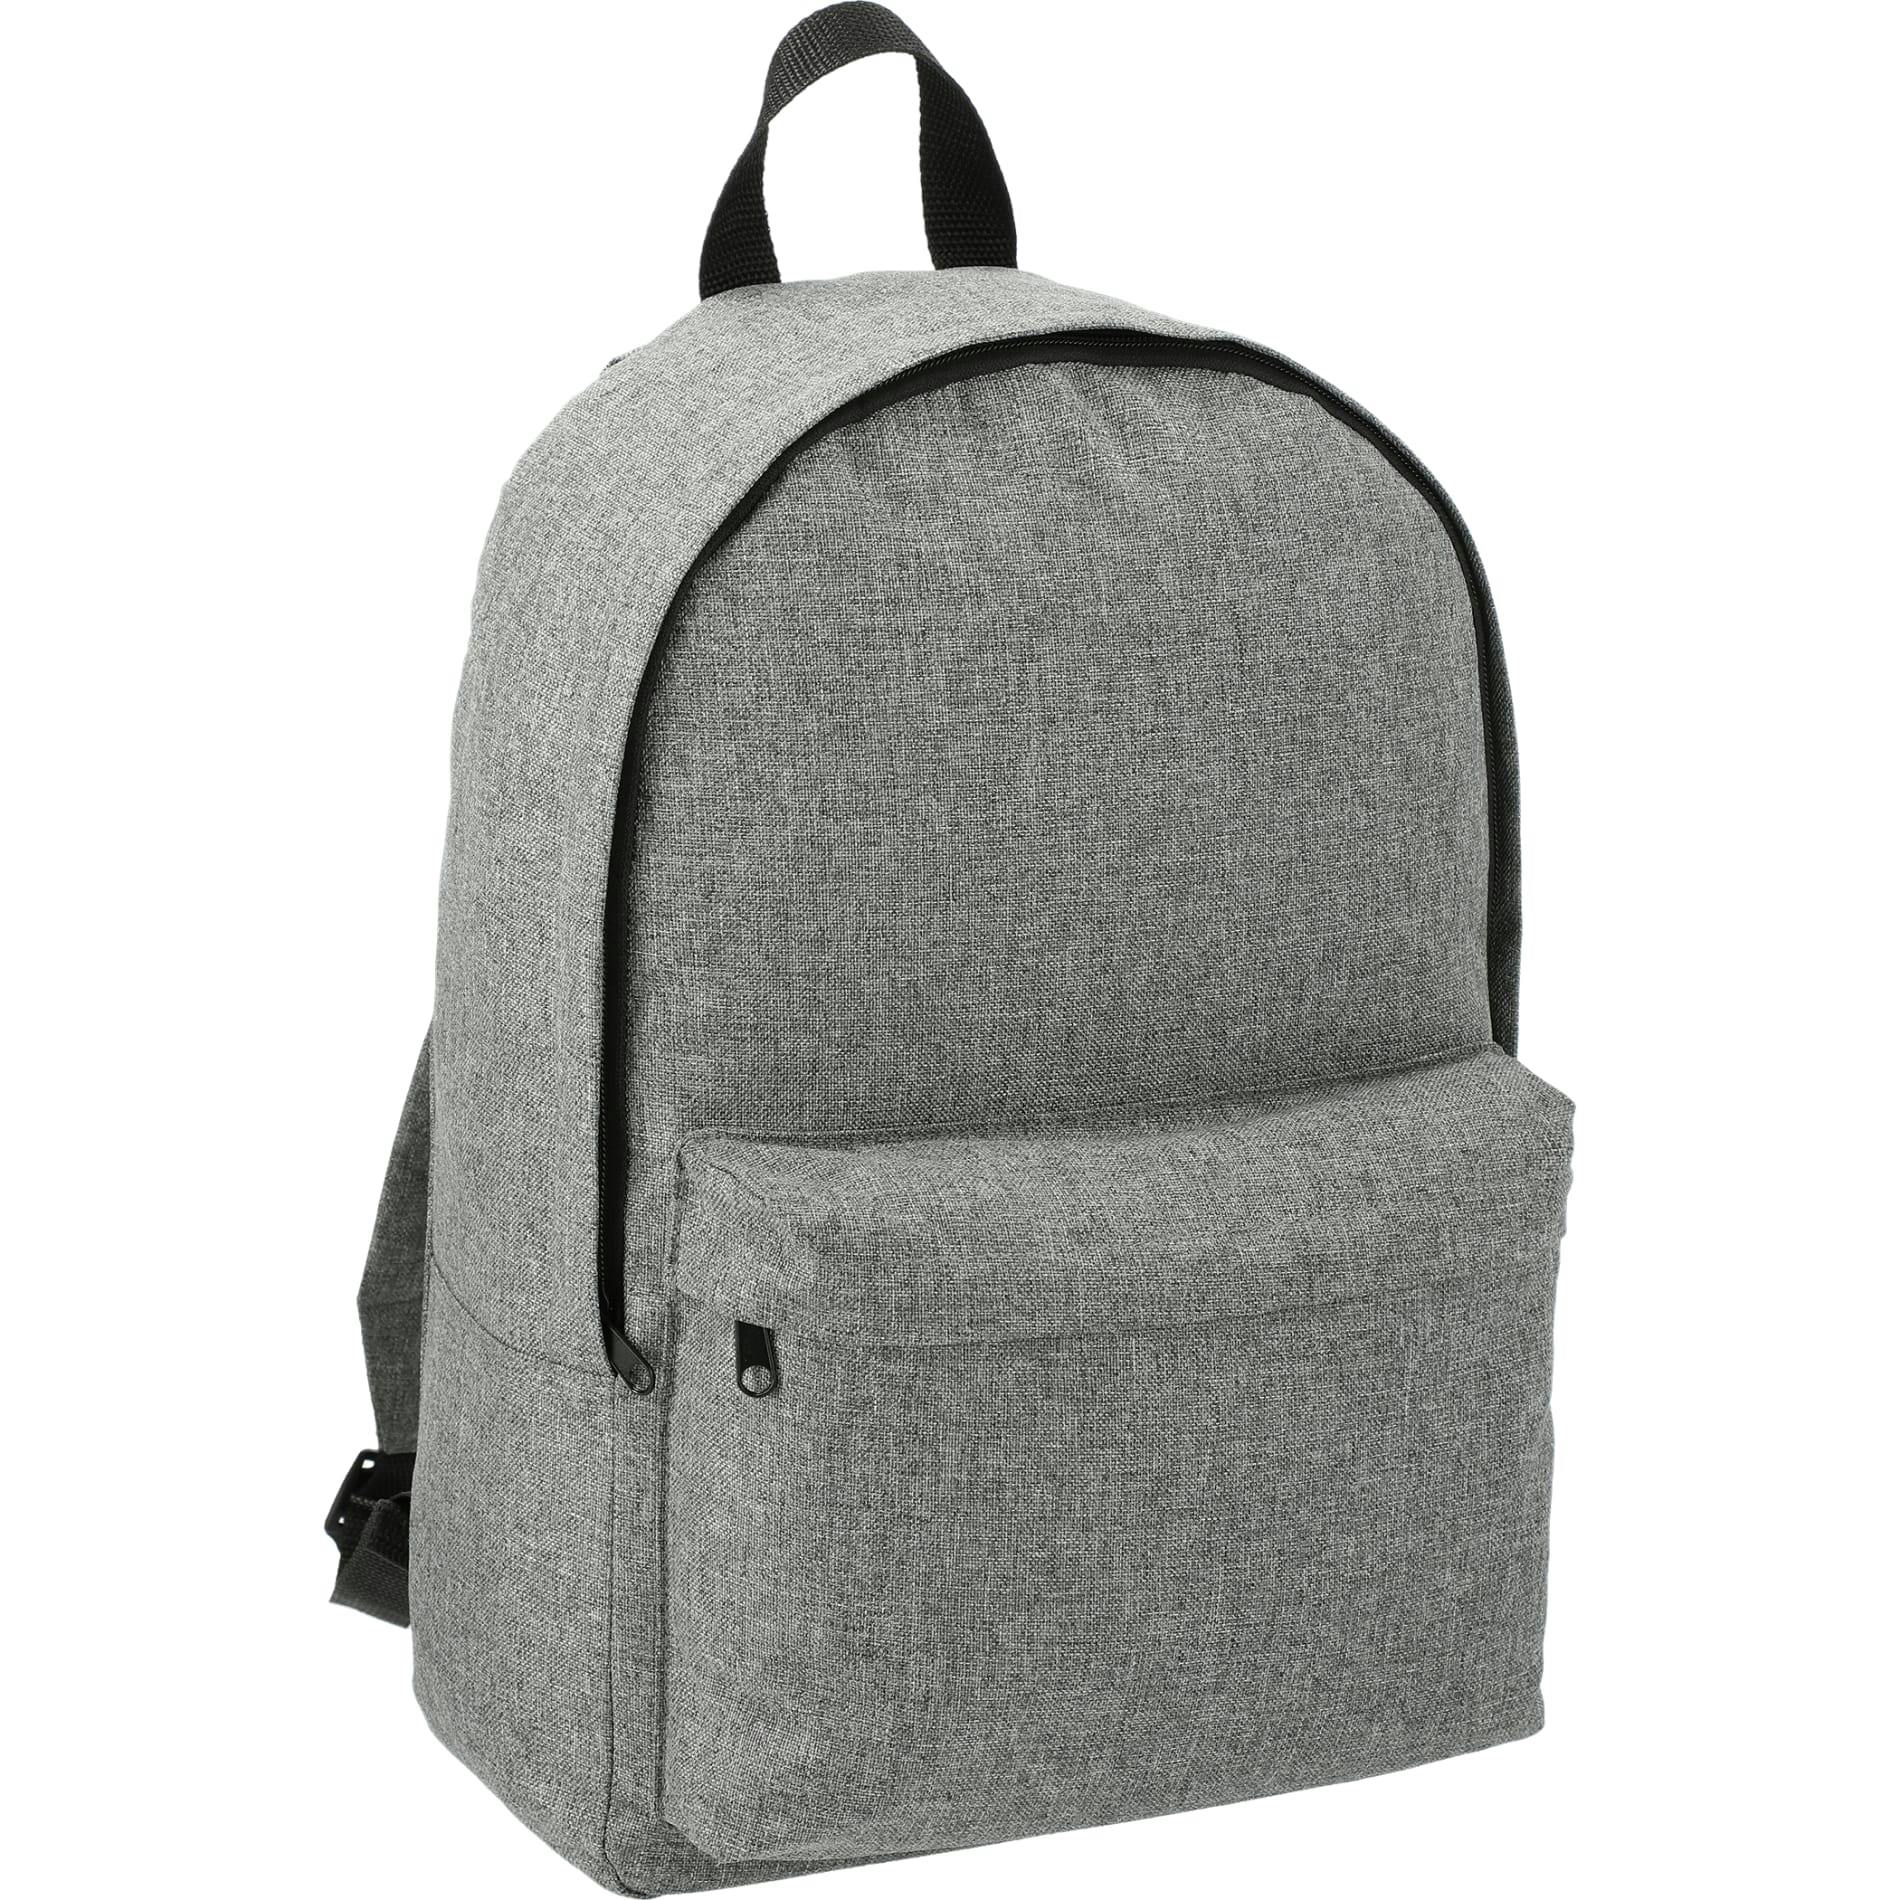 Reign Backpack - additional Image 3